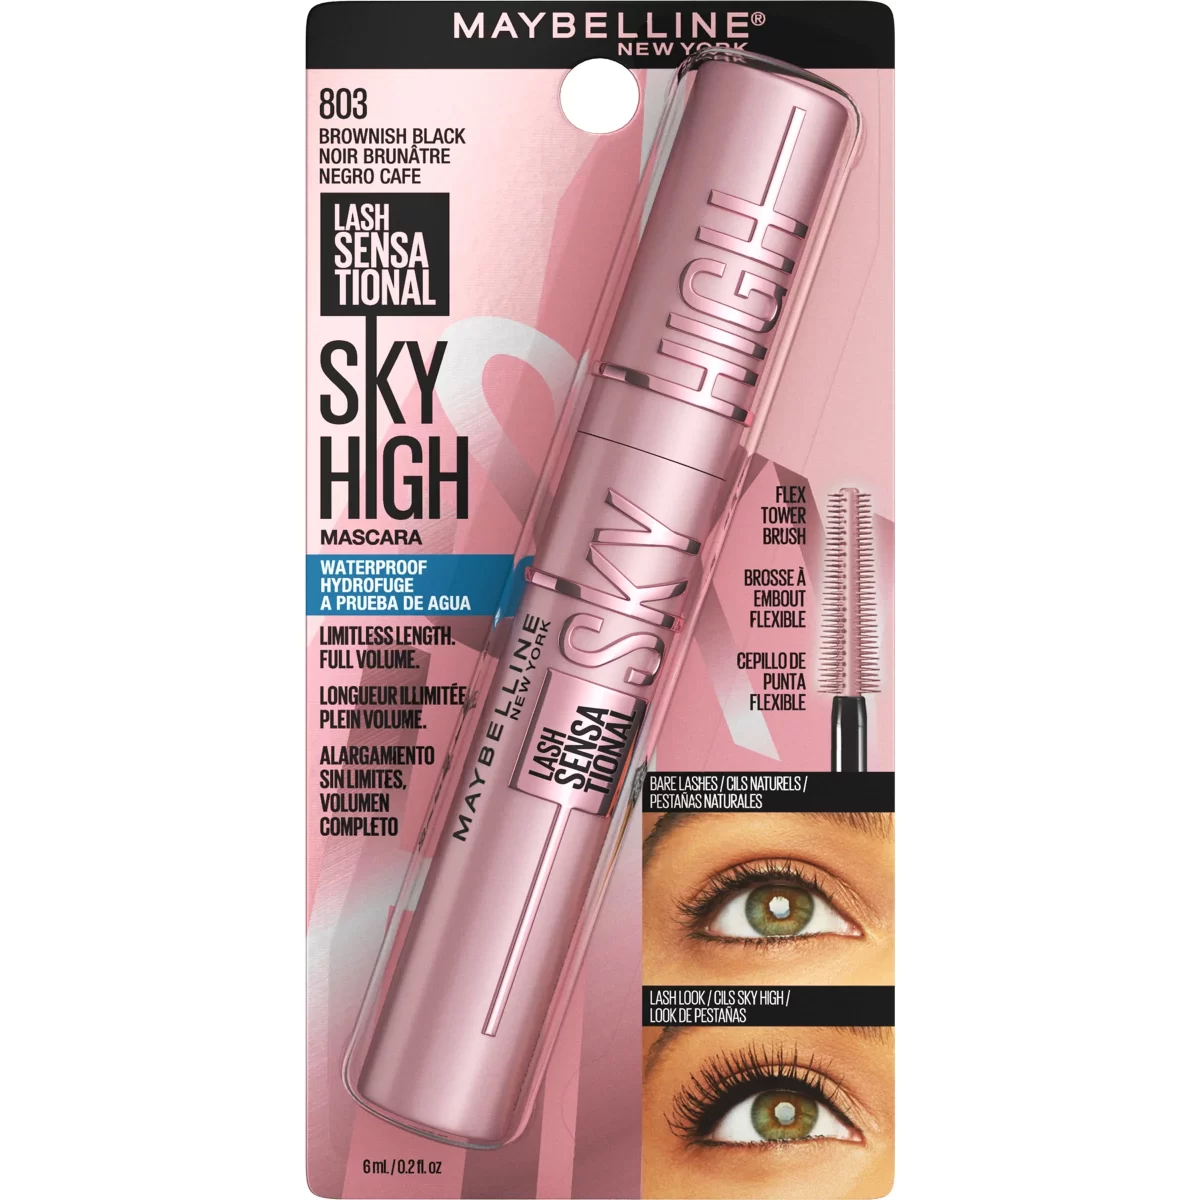 Fly High in the Sky with Maybelline!